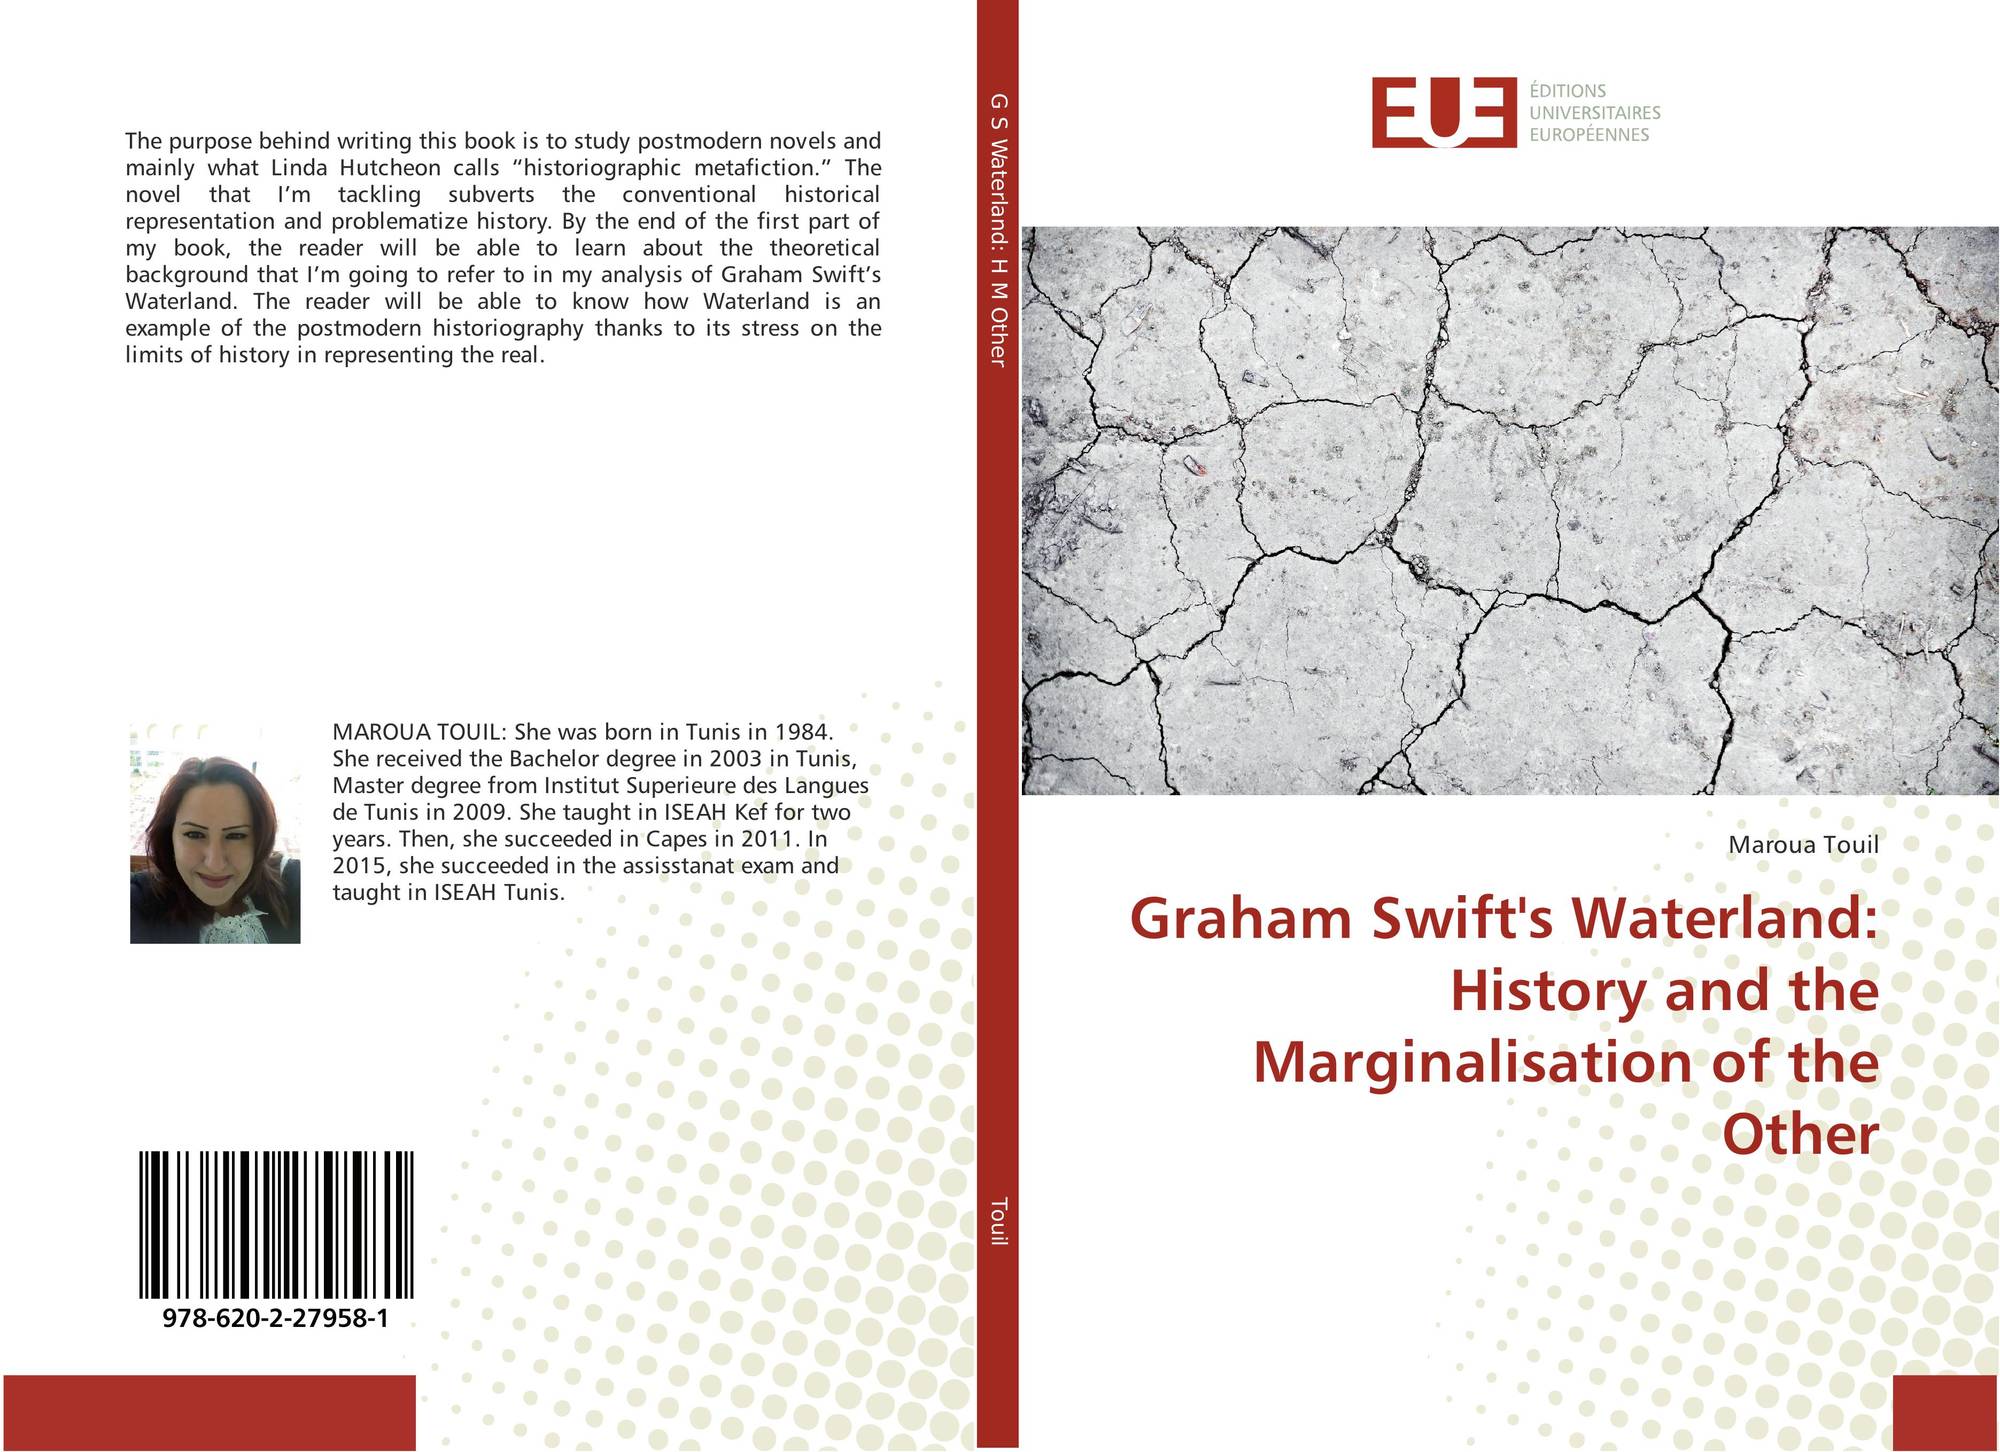 Graham Swift S Waterland History And The Marginalisation Of The Other 978 620 2 27958 1 6202279583 9786202279581 By Maroua Touil